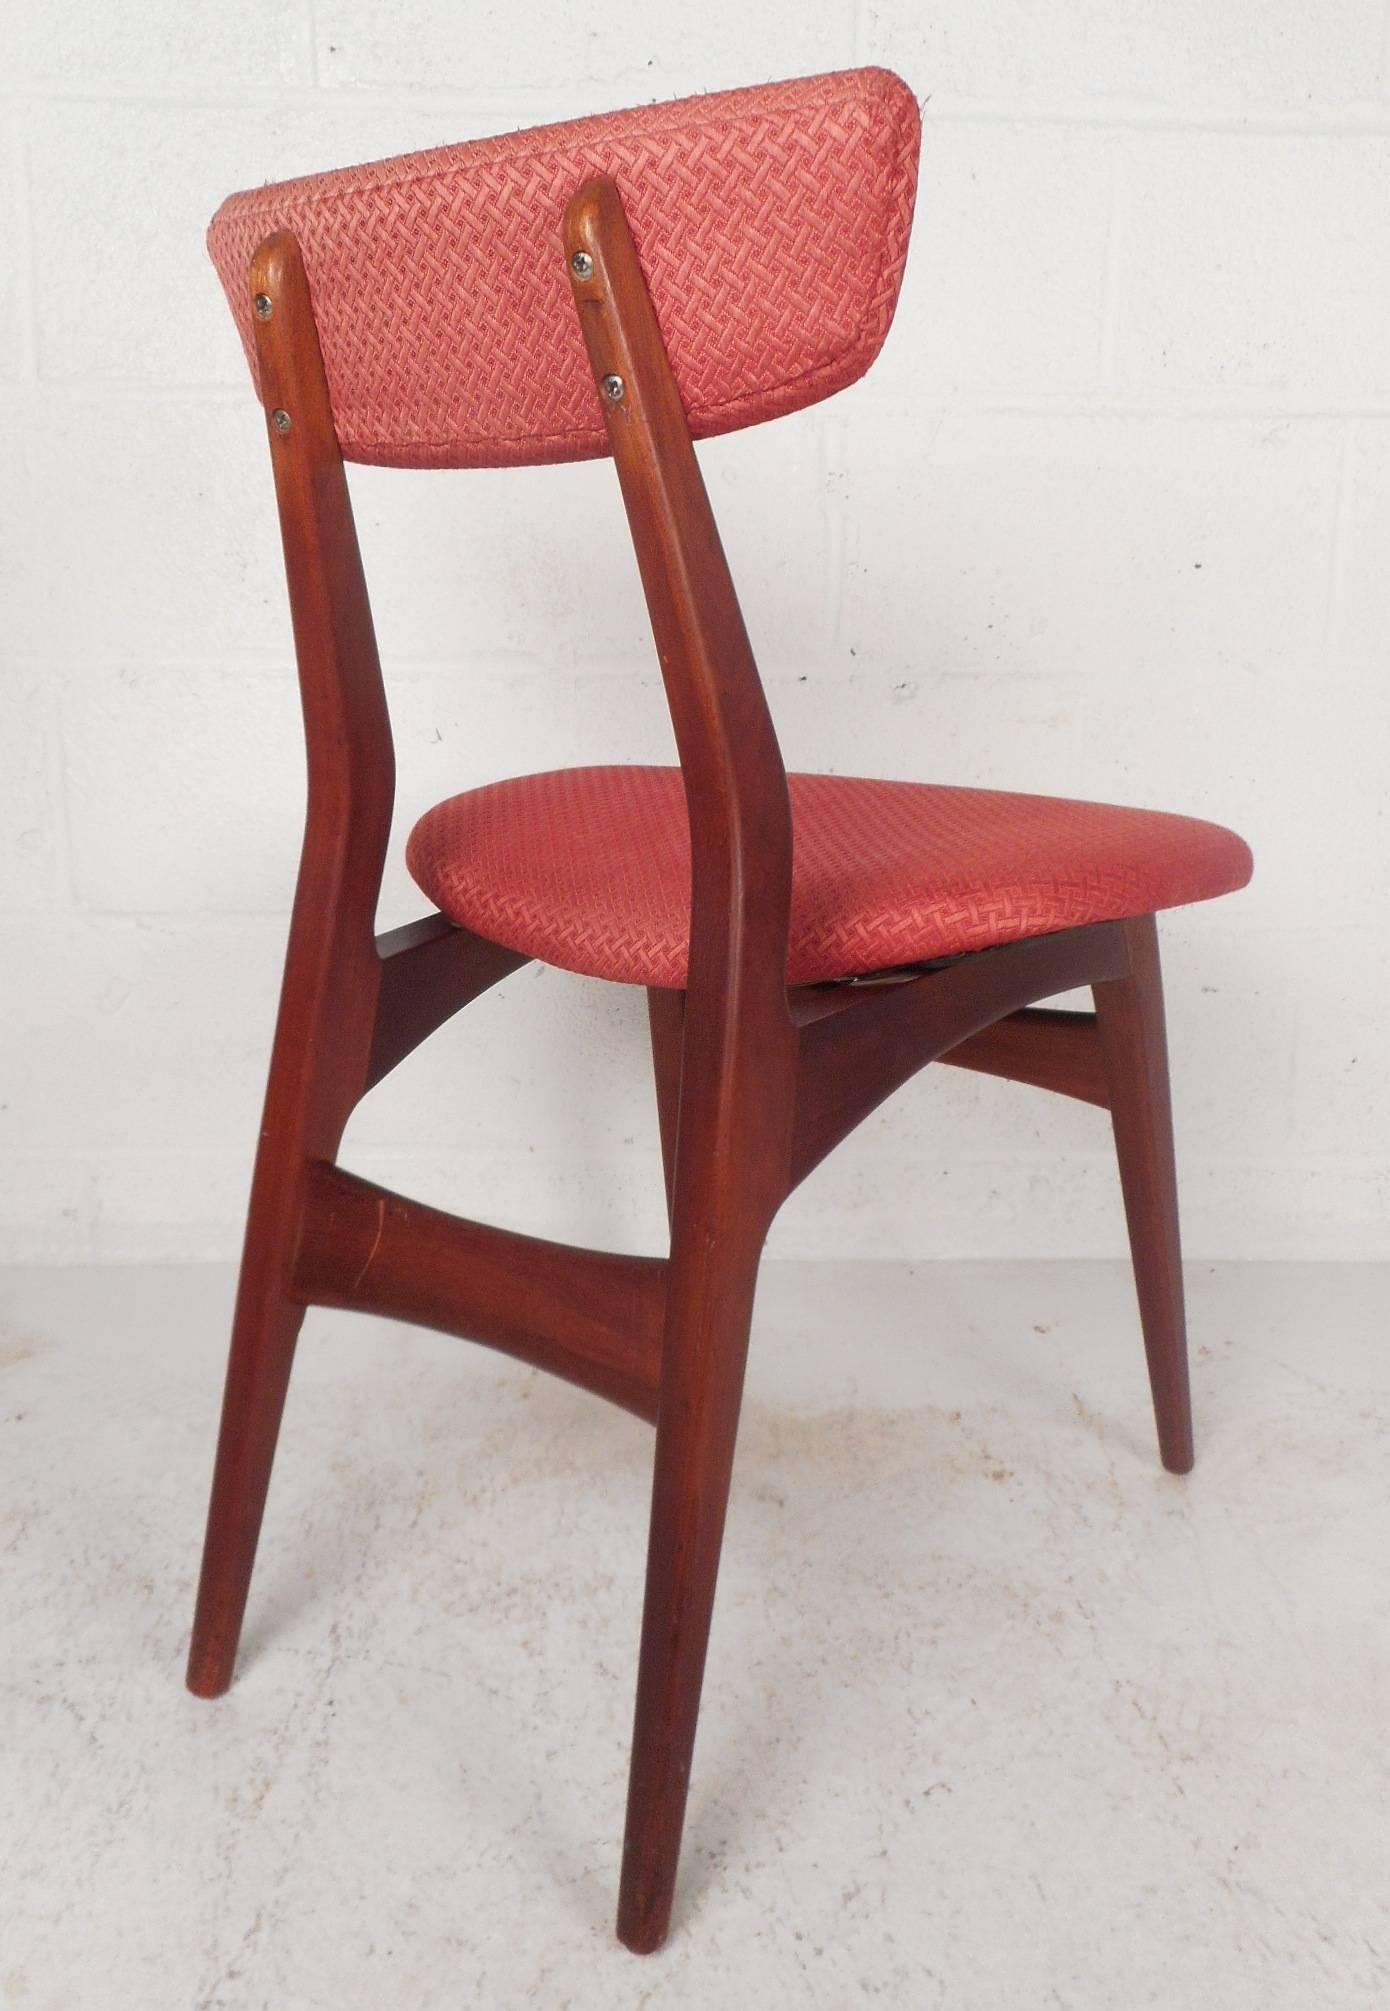 Upholstery Set of Four Mid-Century Modern Dining Chairs by George Nelson for Herman Miller